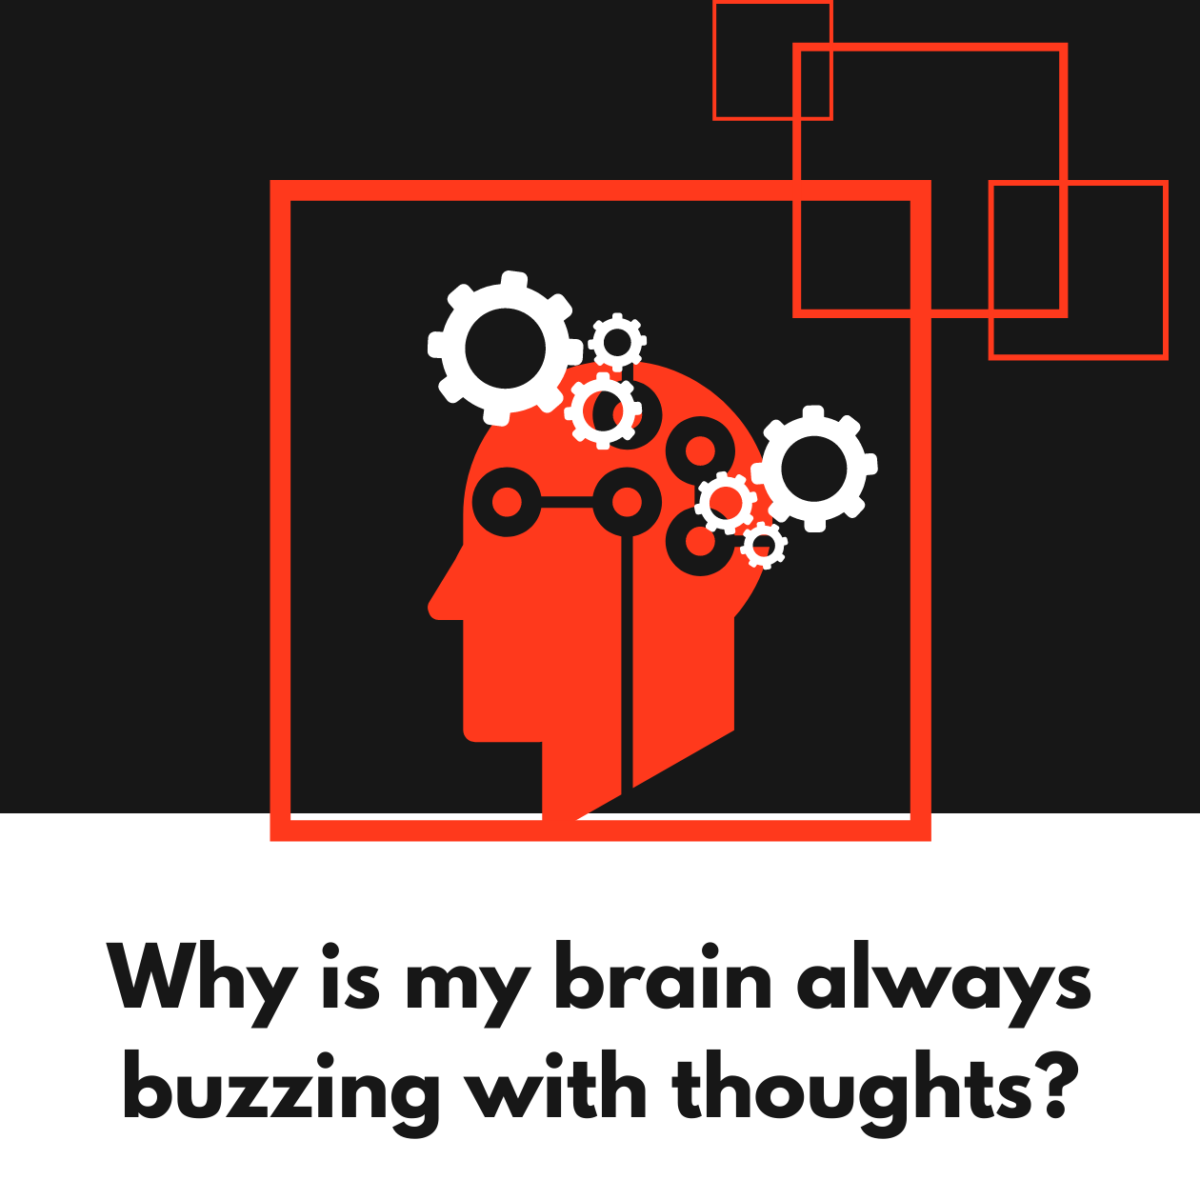 Why is my brain always buzzing with thoughts?